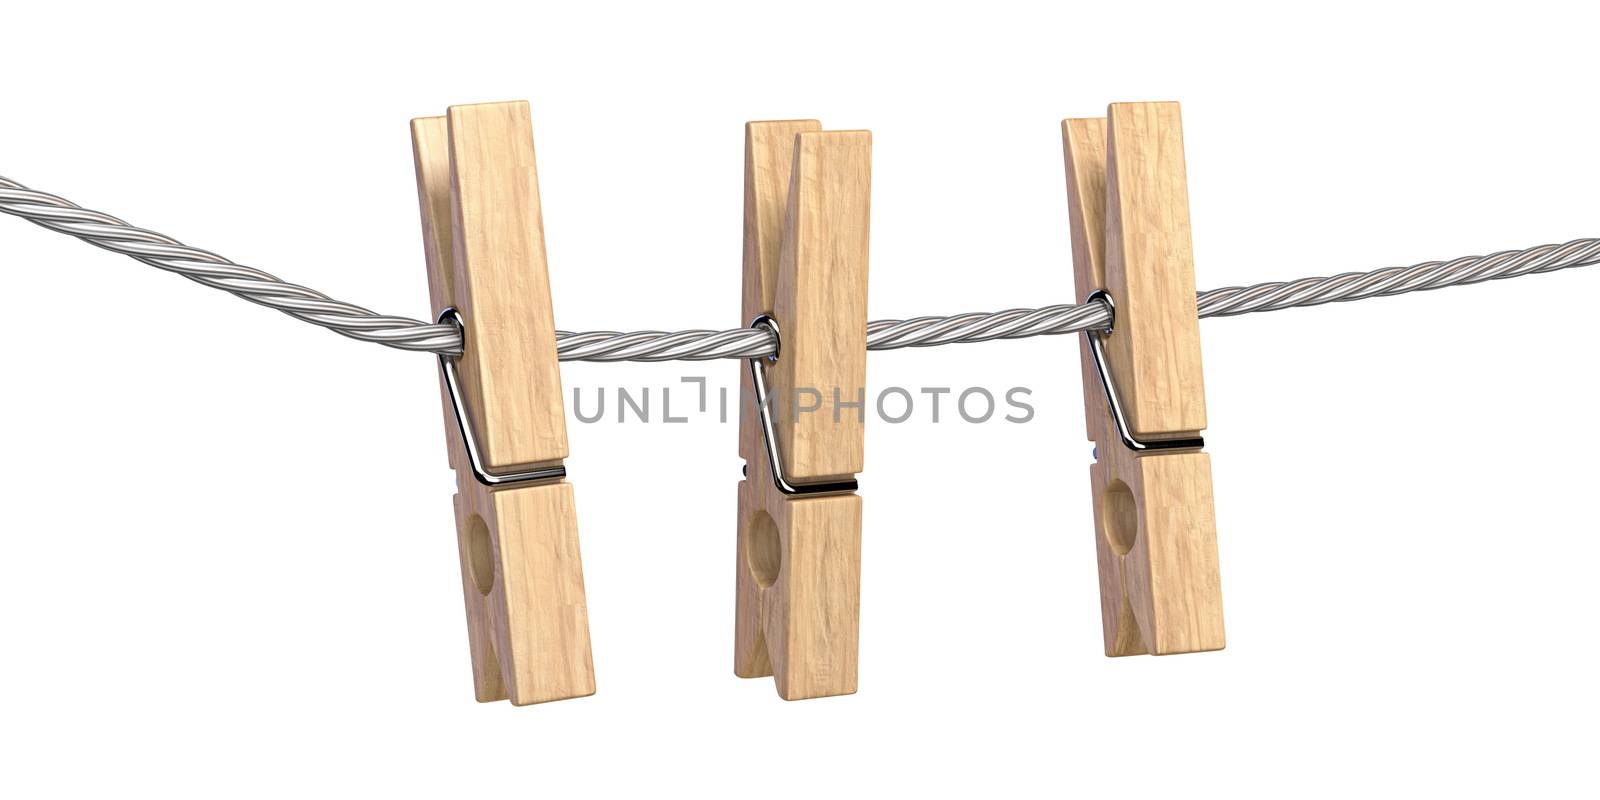 Three clothes pins on rope 3D render illustration isolated on white background